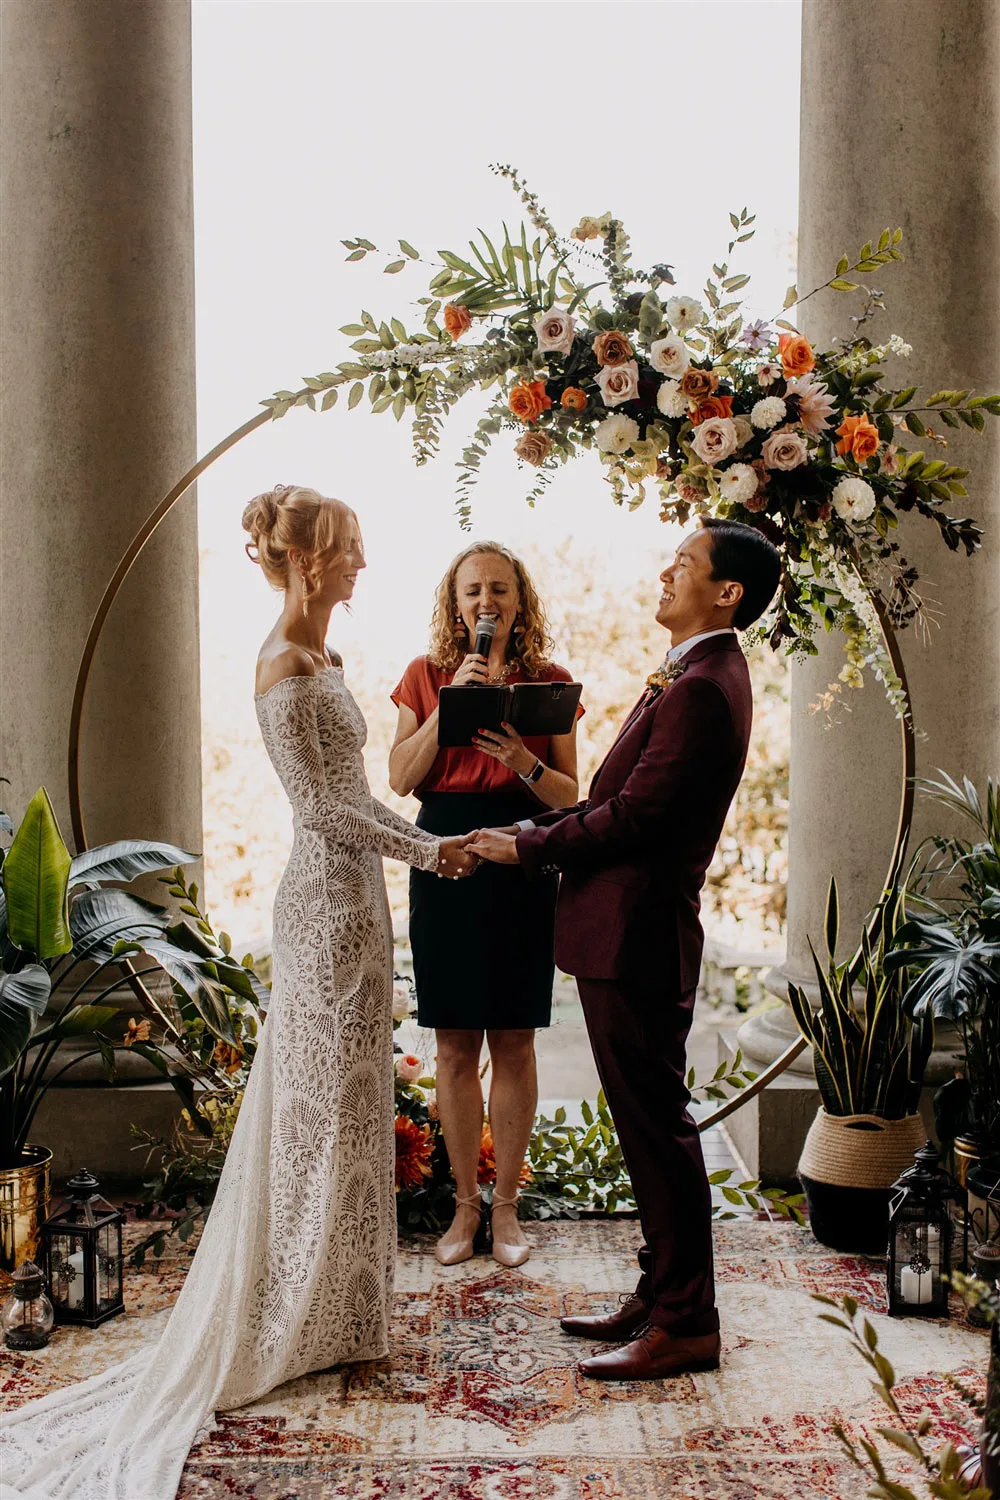 Officiant Jane leading a ceremony for Paige and Corey in front of a floral arch